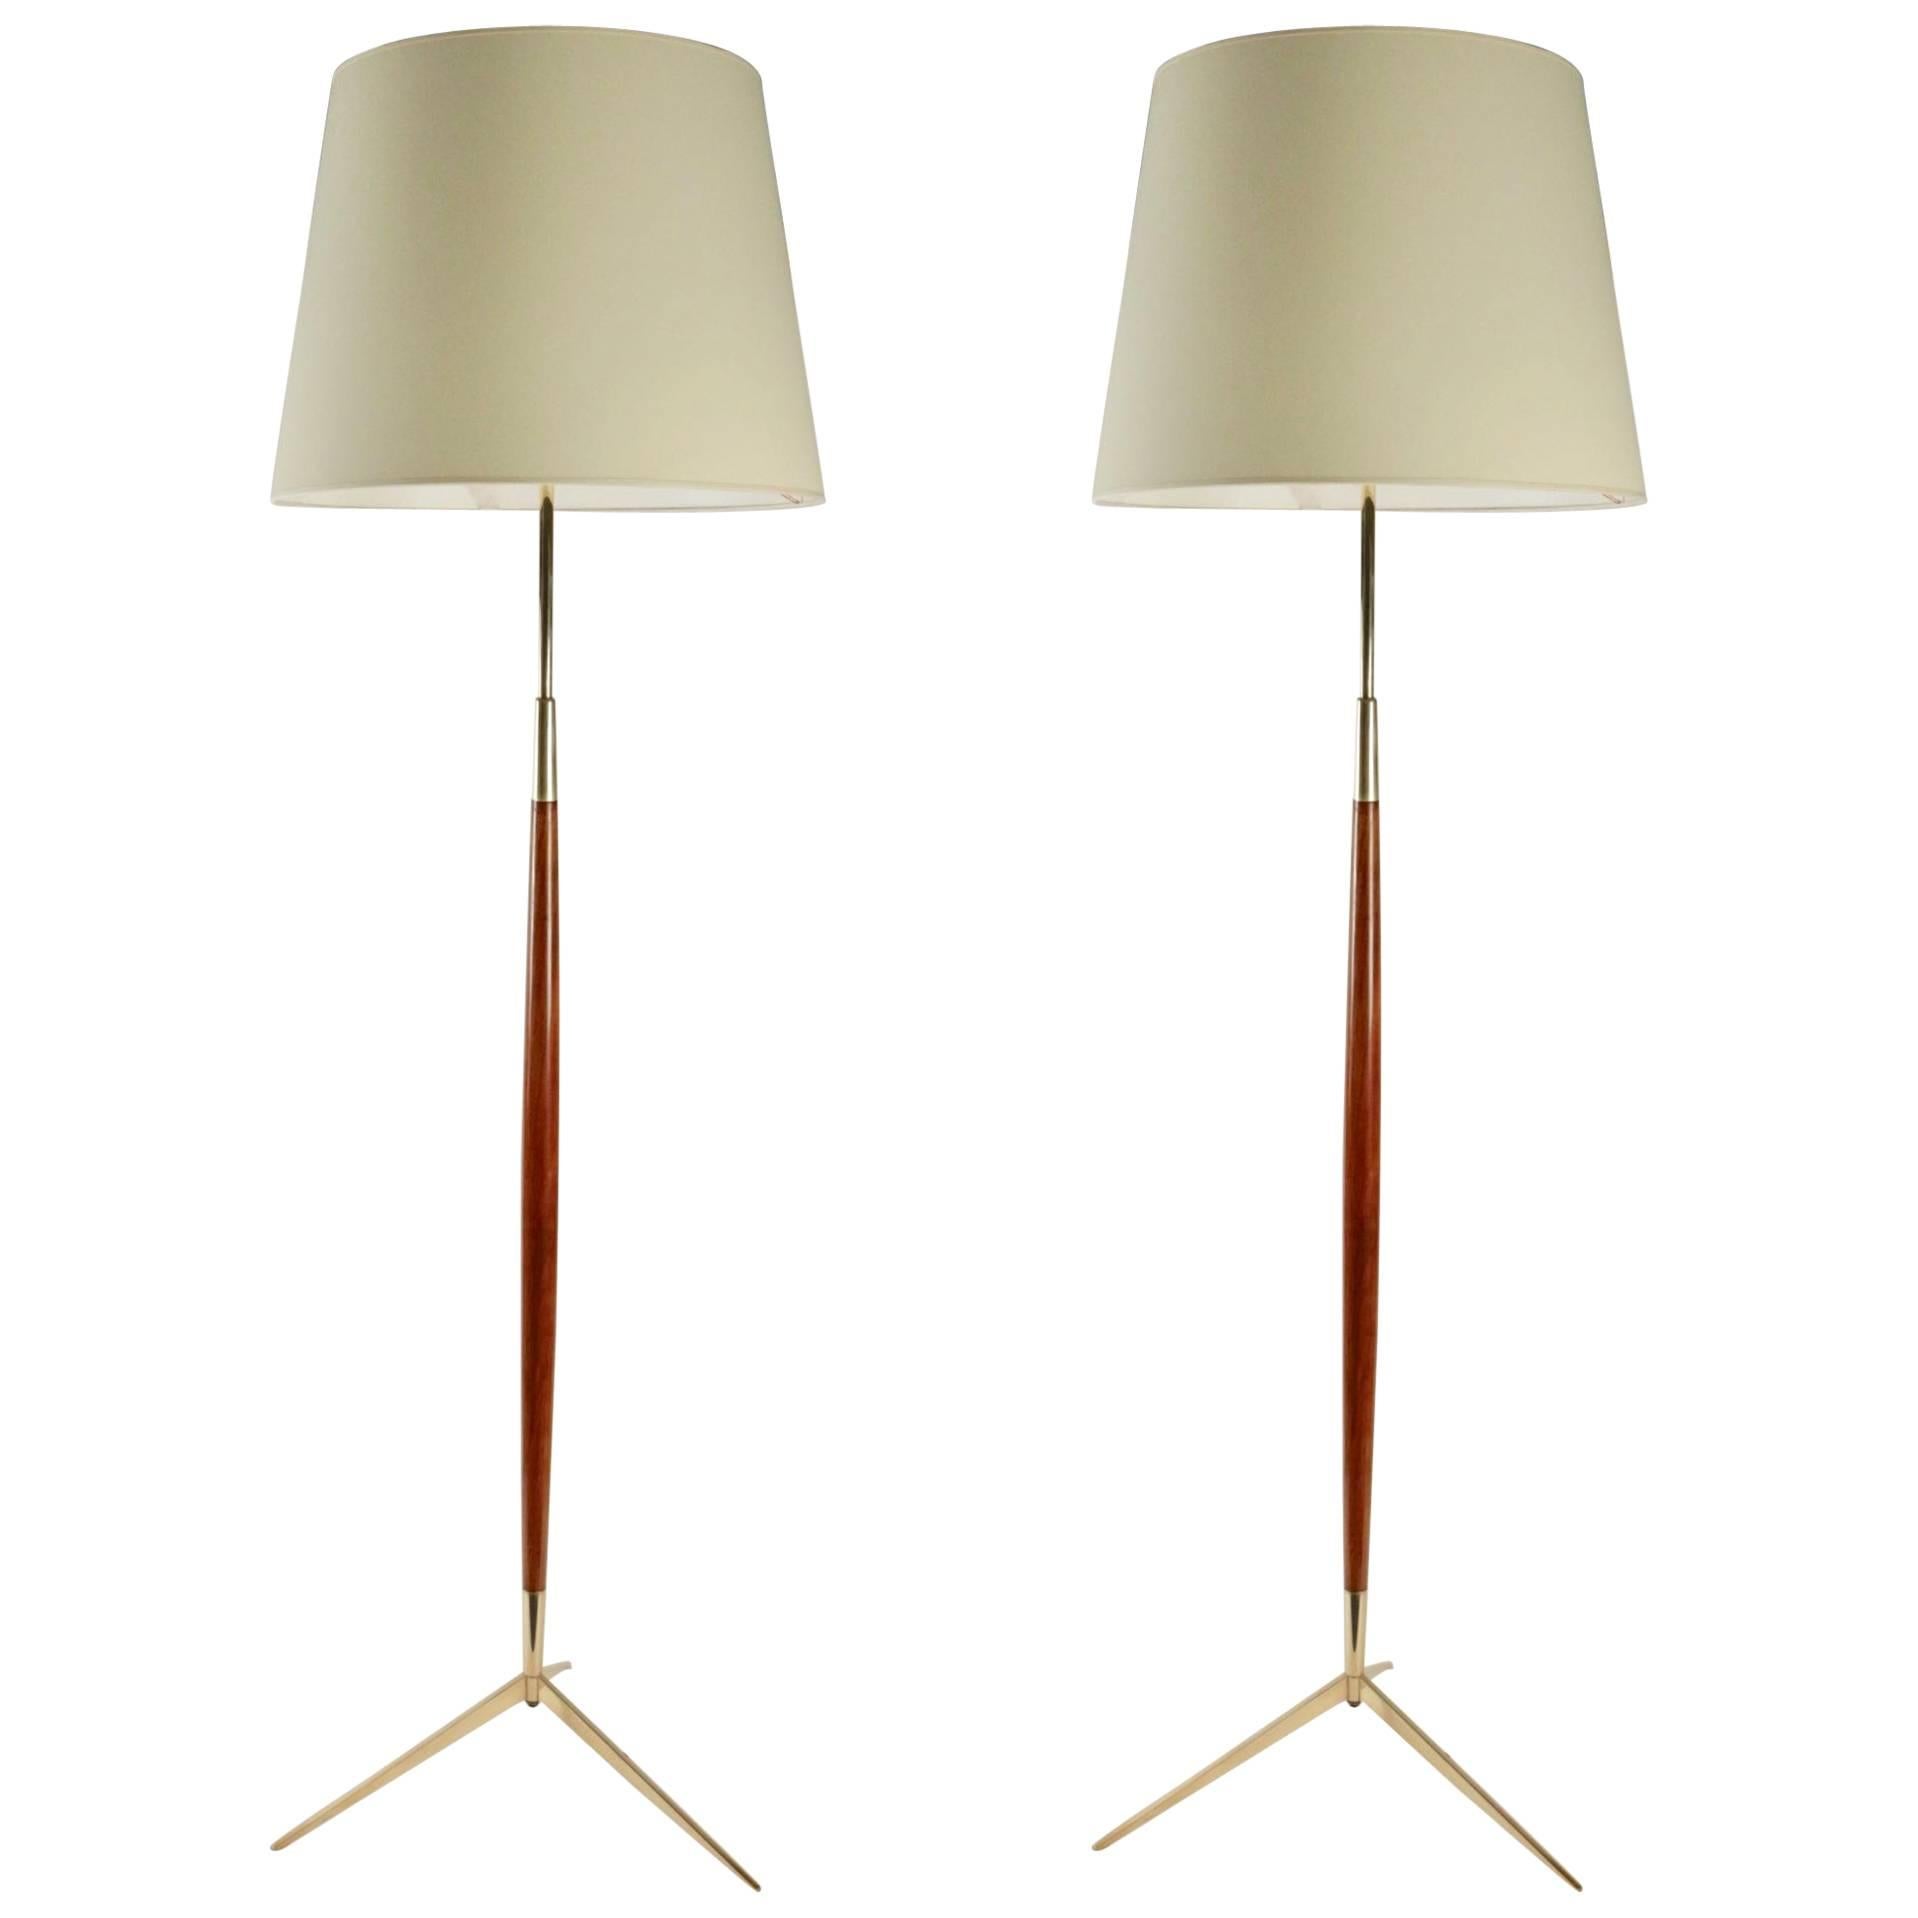 1950 Pair of Brass and Wood Tripod Floor Lamps Attributed to Stilnovo